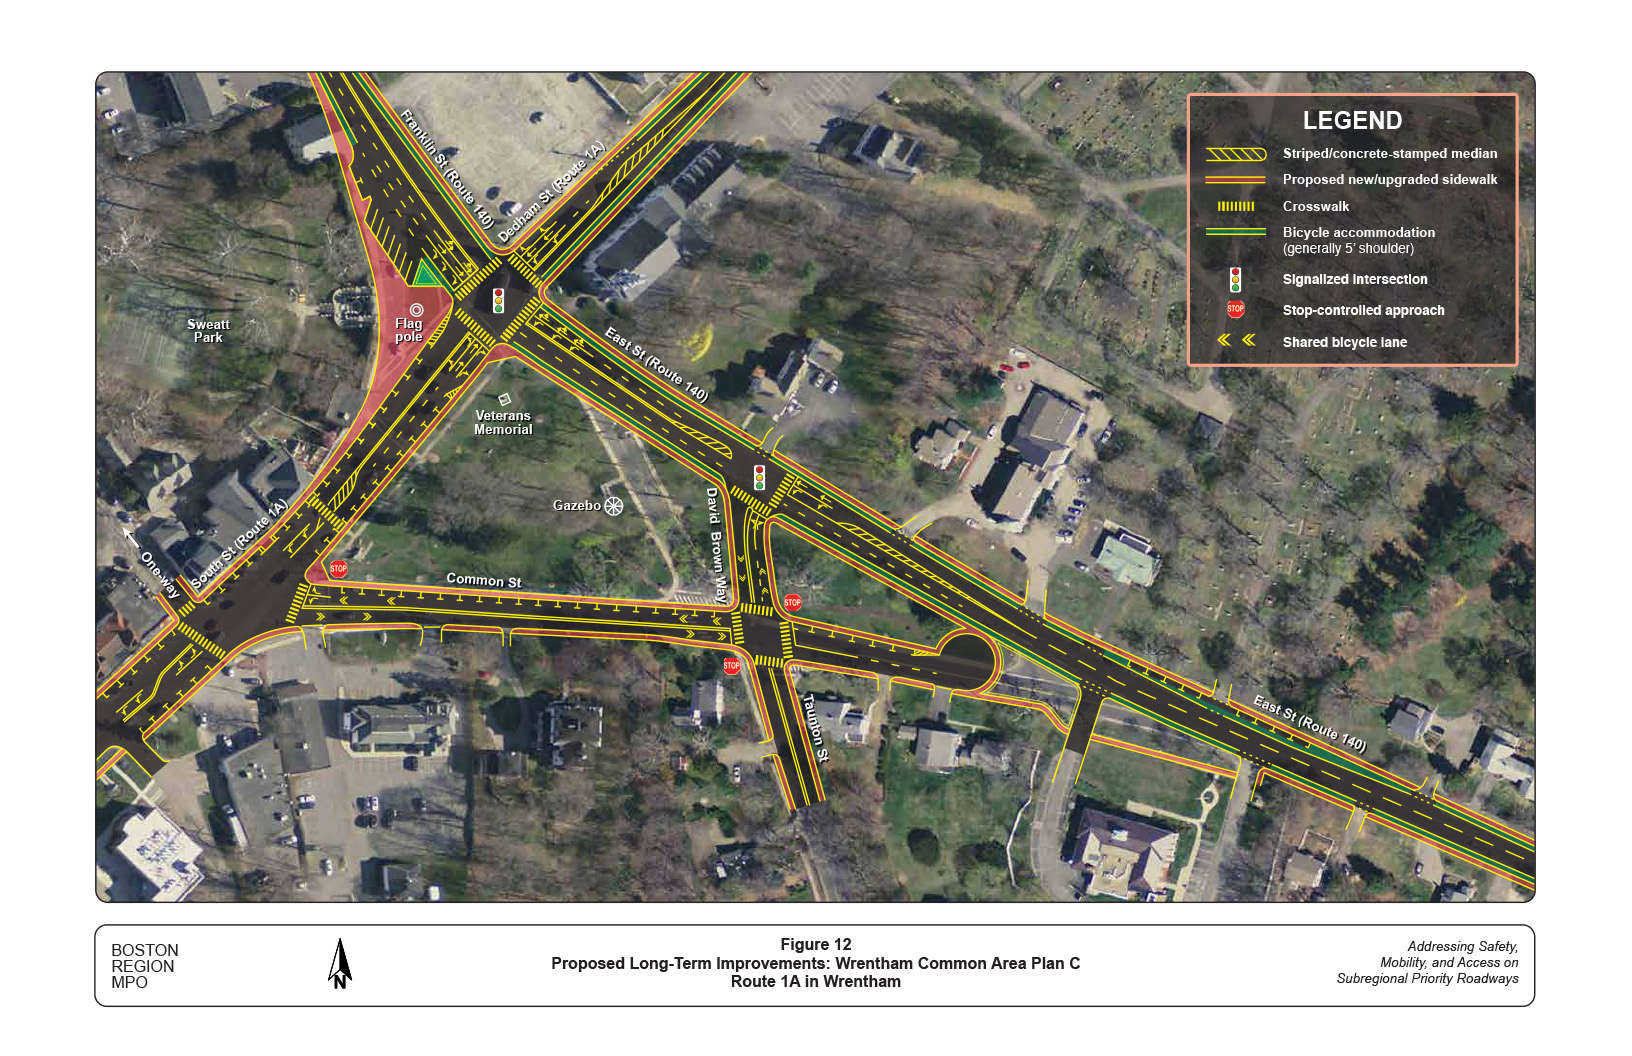 Figure 12 is a map that illustrates the proposed long-term improvements to Route 1A at the Wrentham Common area (Plan C).